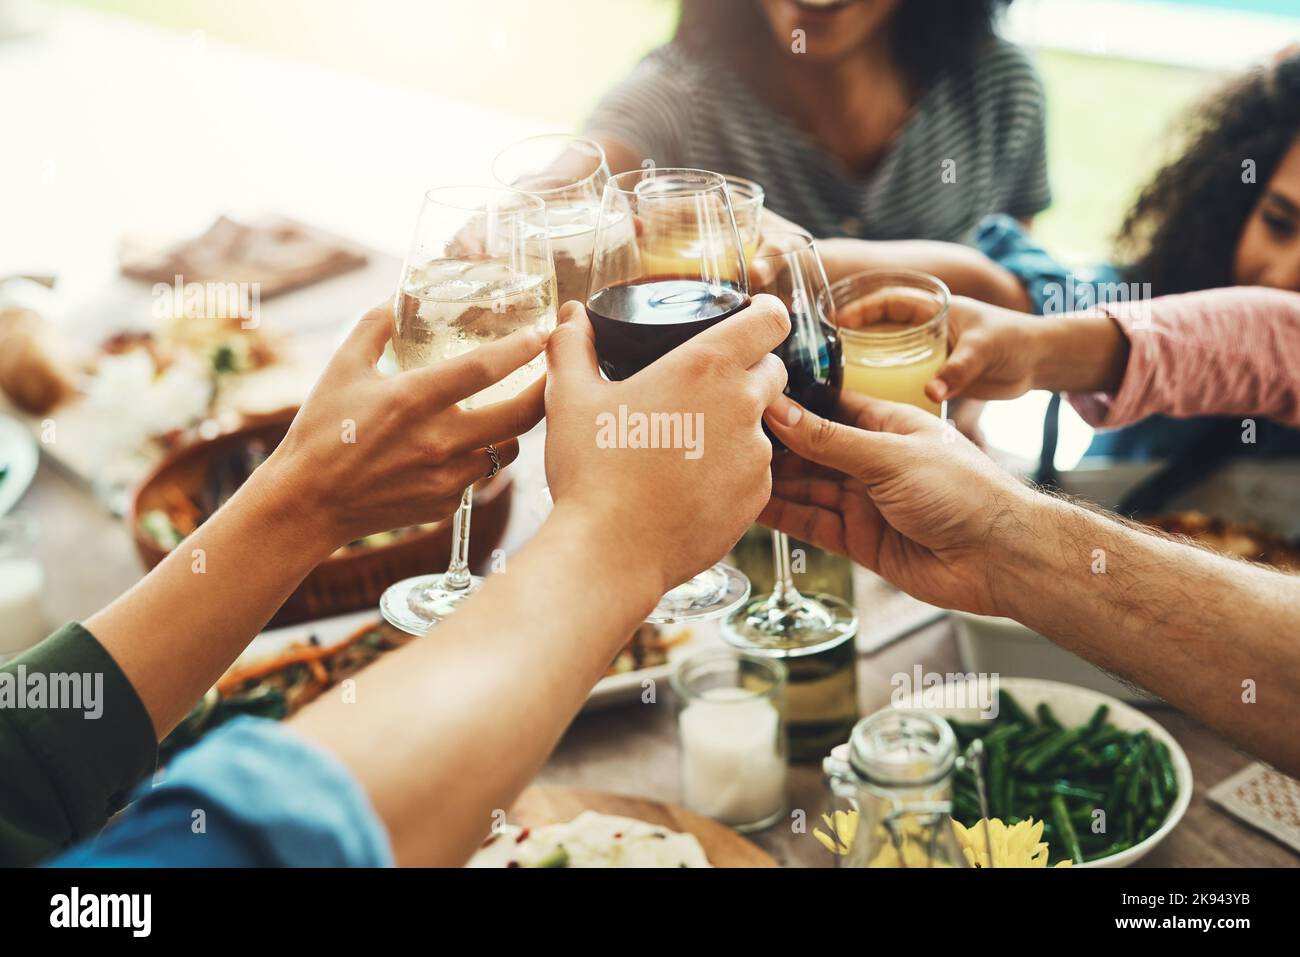 Drinks up everybody. a group of unrecognizable people joining their glasses together for a toast while enjoying a meal together outdoors. Stock Photo